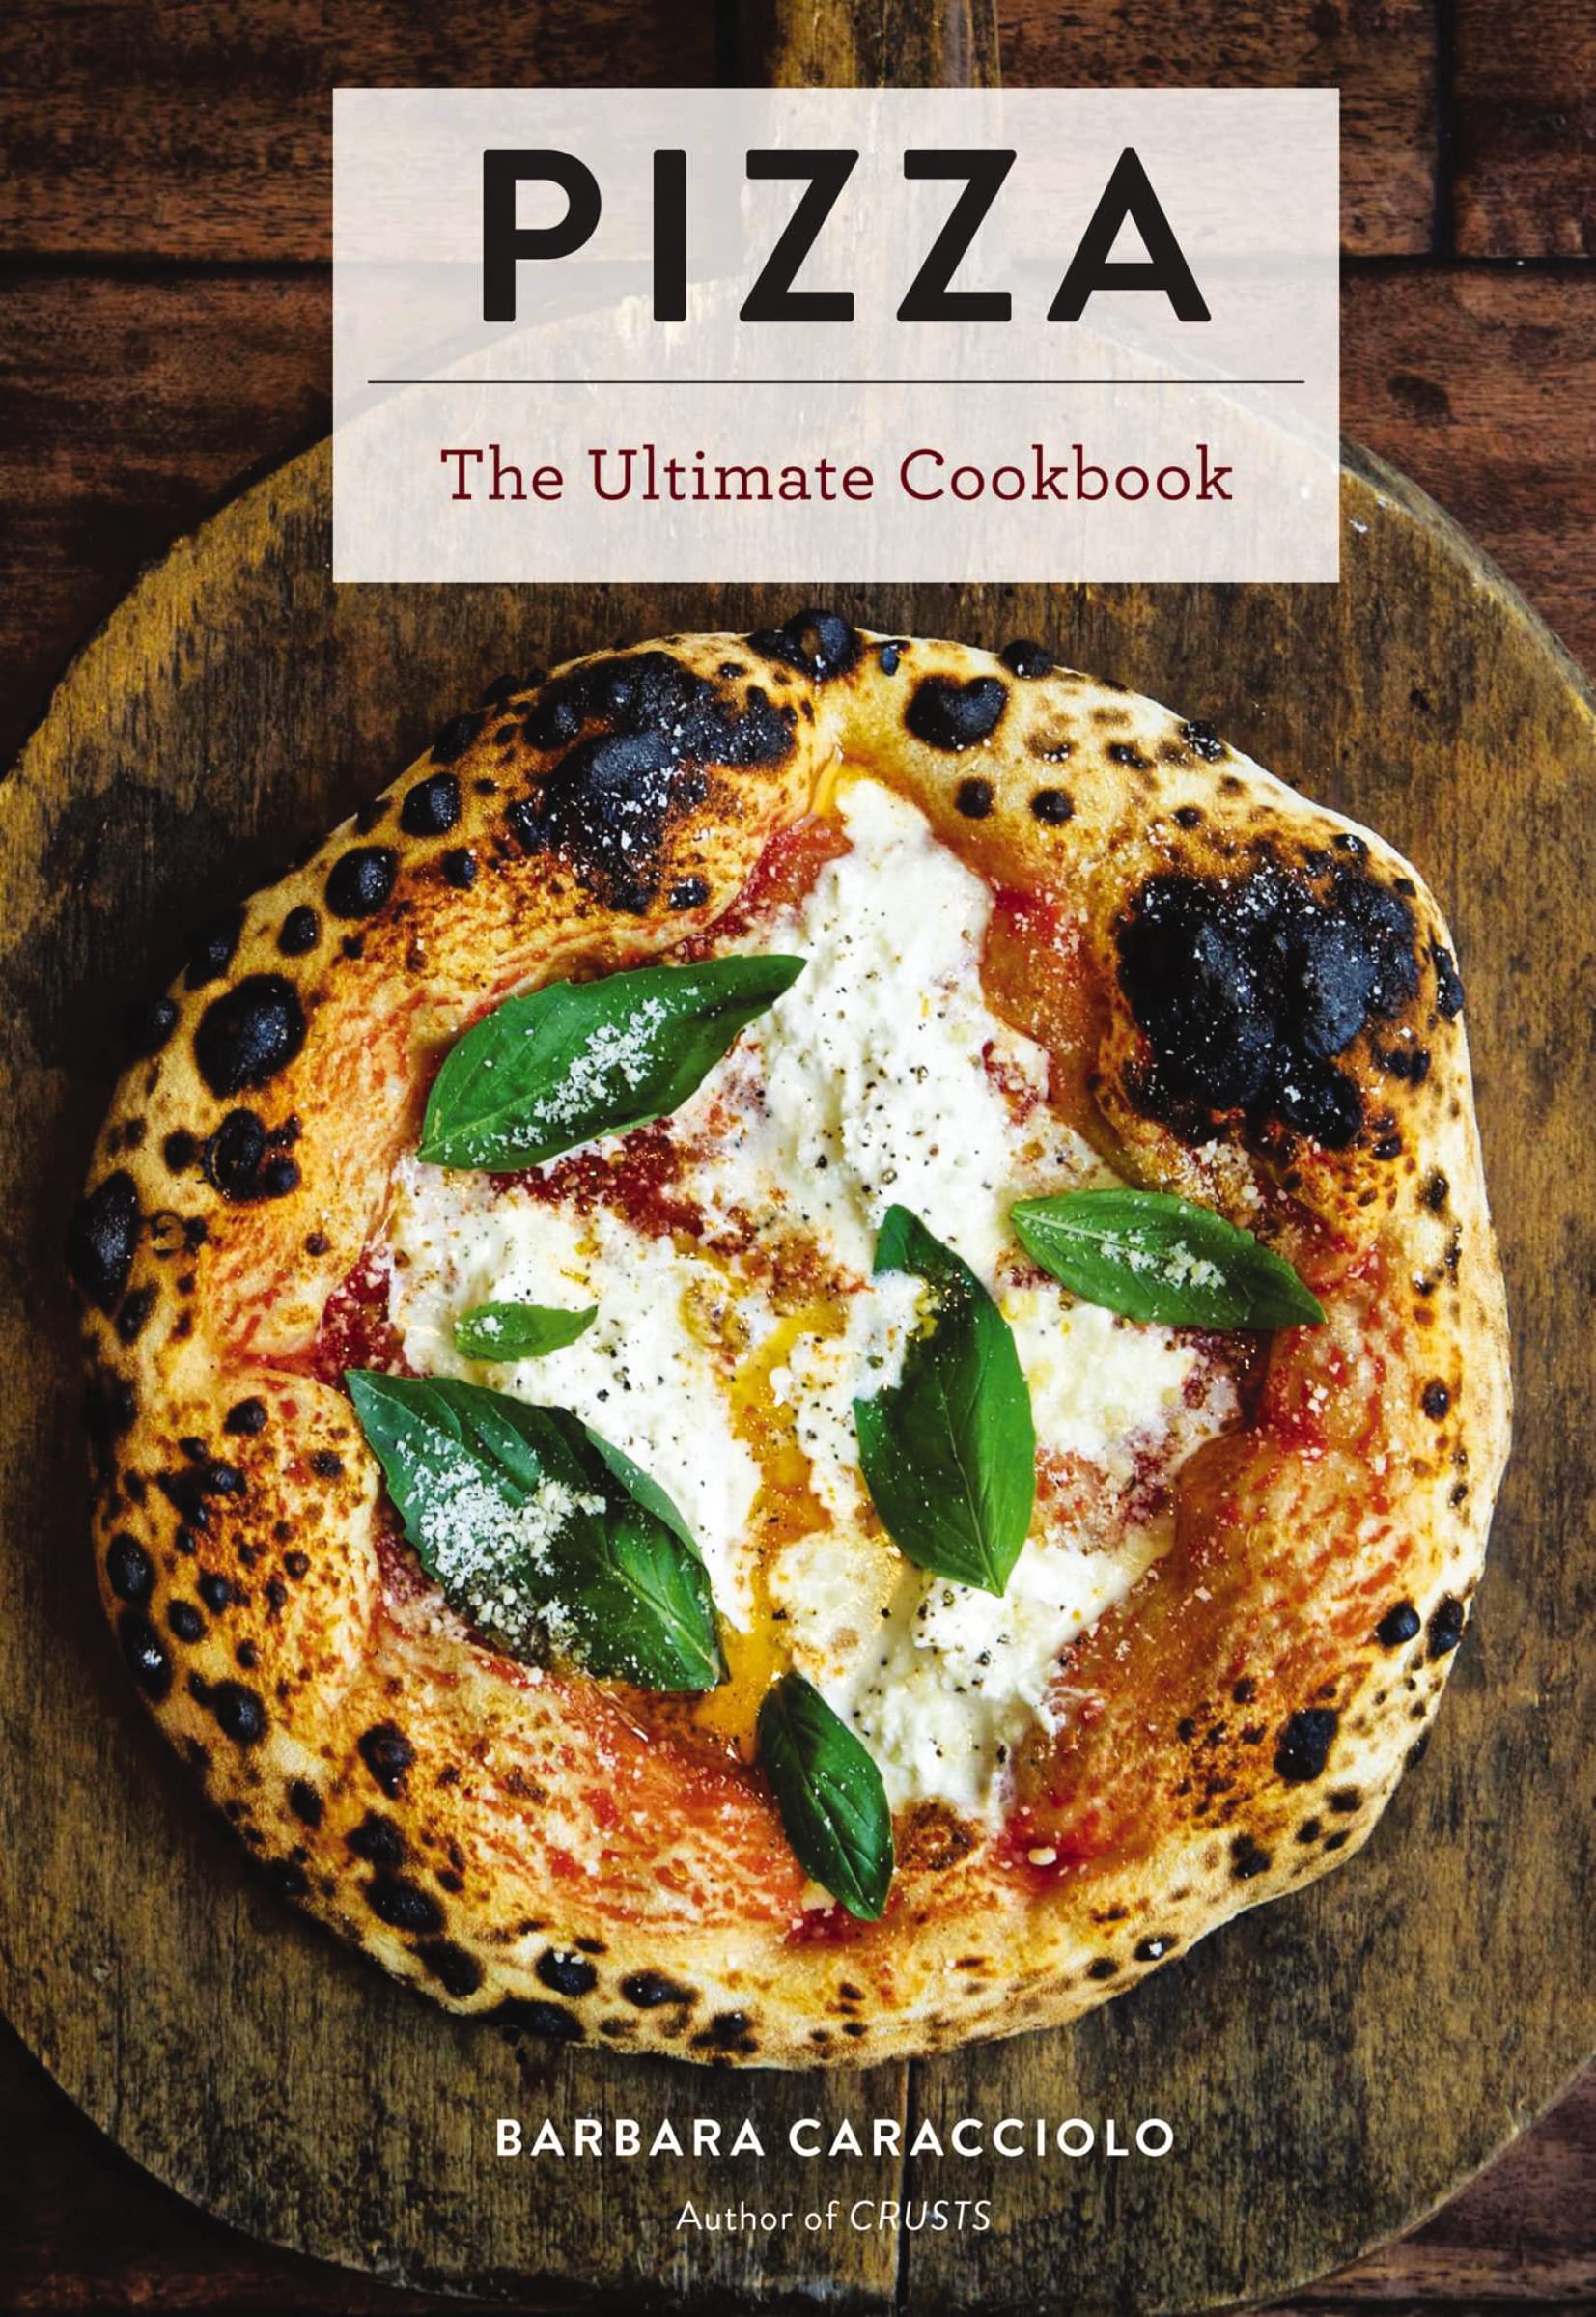 Pizza: The Ultimate Cookbook Featuring More Than 300 Recipes (Italian Cooking, Neapolitan Pizzas, Gifts for Foodies, Cookbook, History of Pizza) (Ultimate Cookbooks)